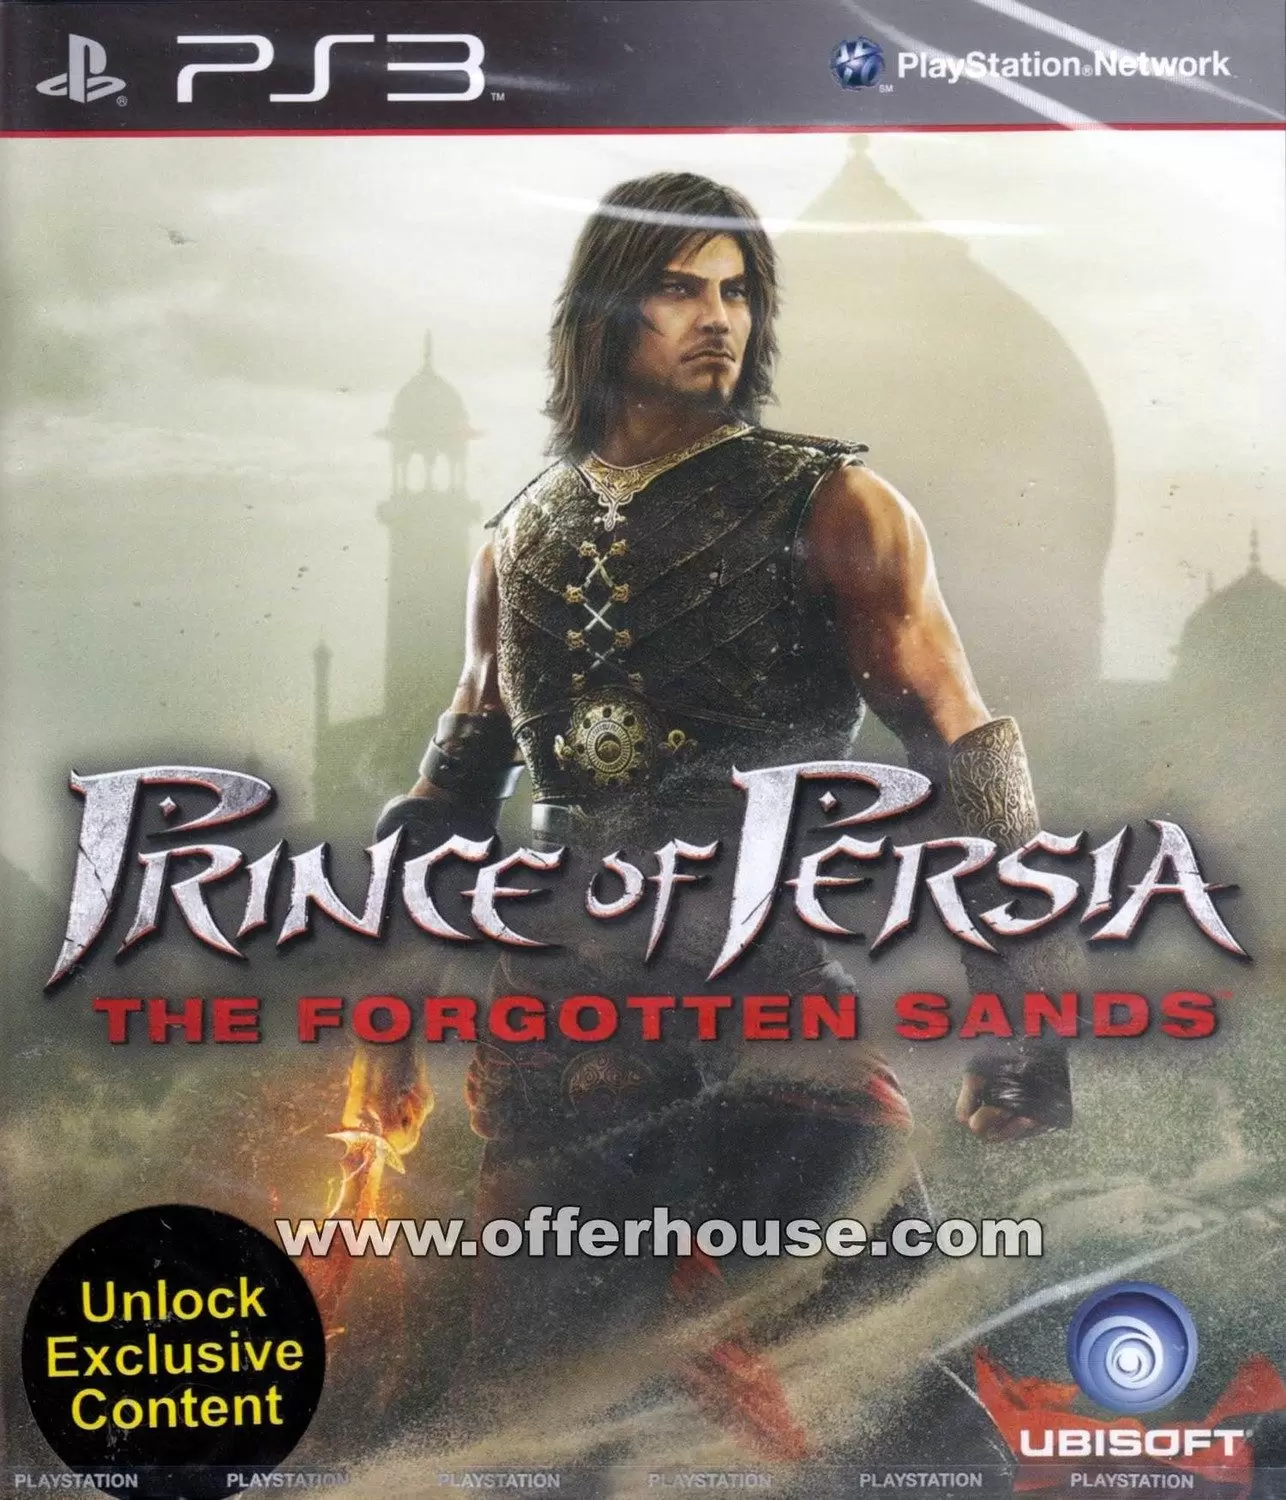 PS3 Games - Prince of Persia: The Forgotten Sands